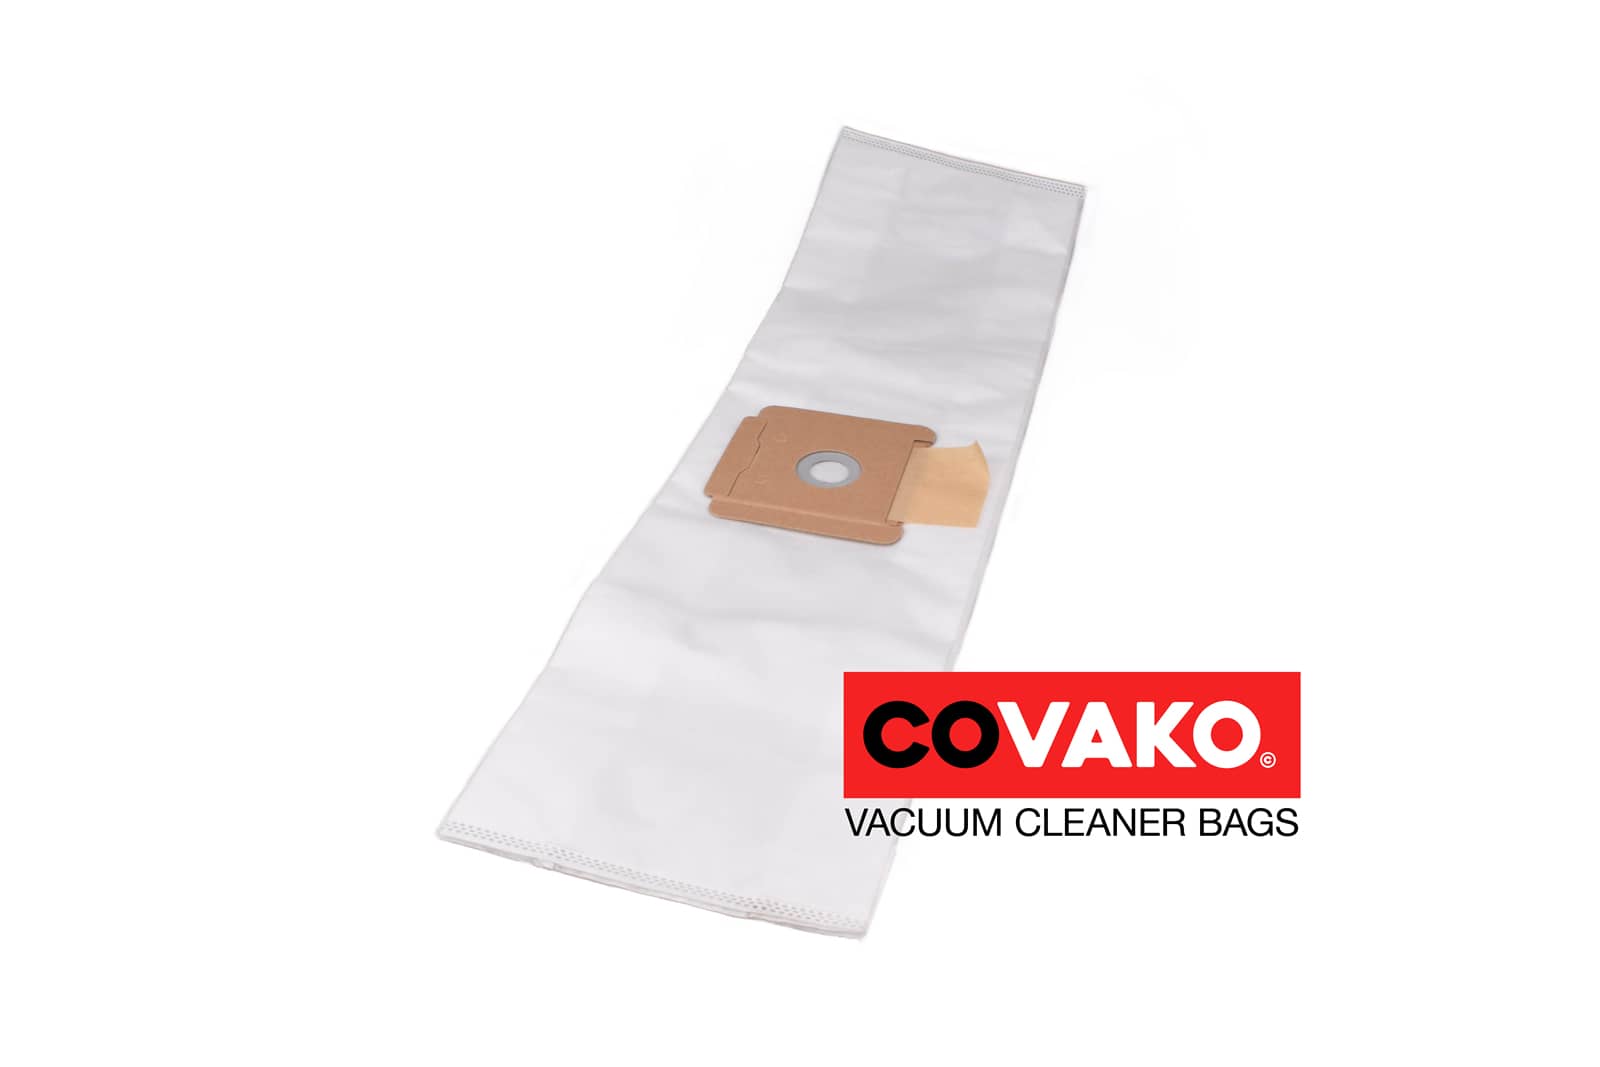 Proclean T 111 PAS / Synthesis - Proclean vacuum cleaner bags